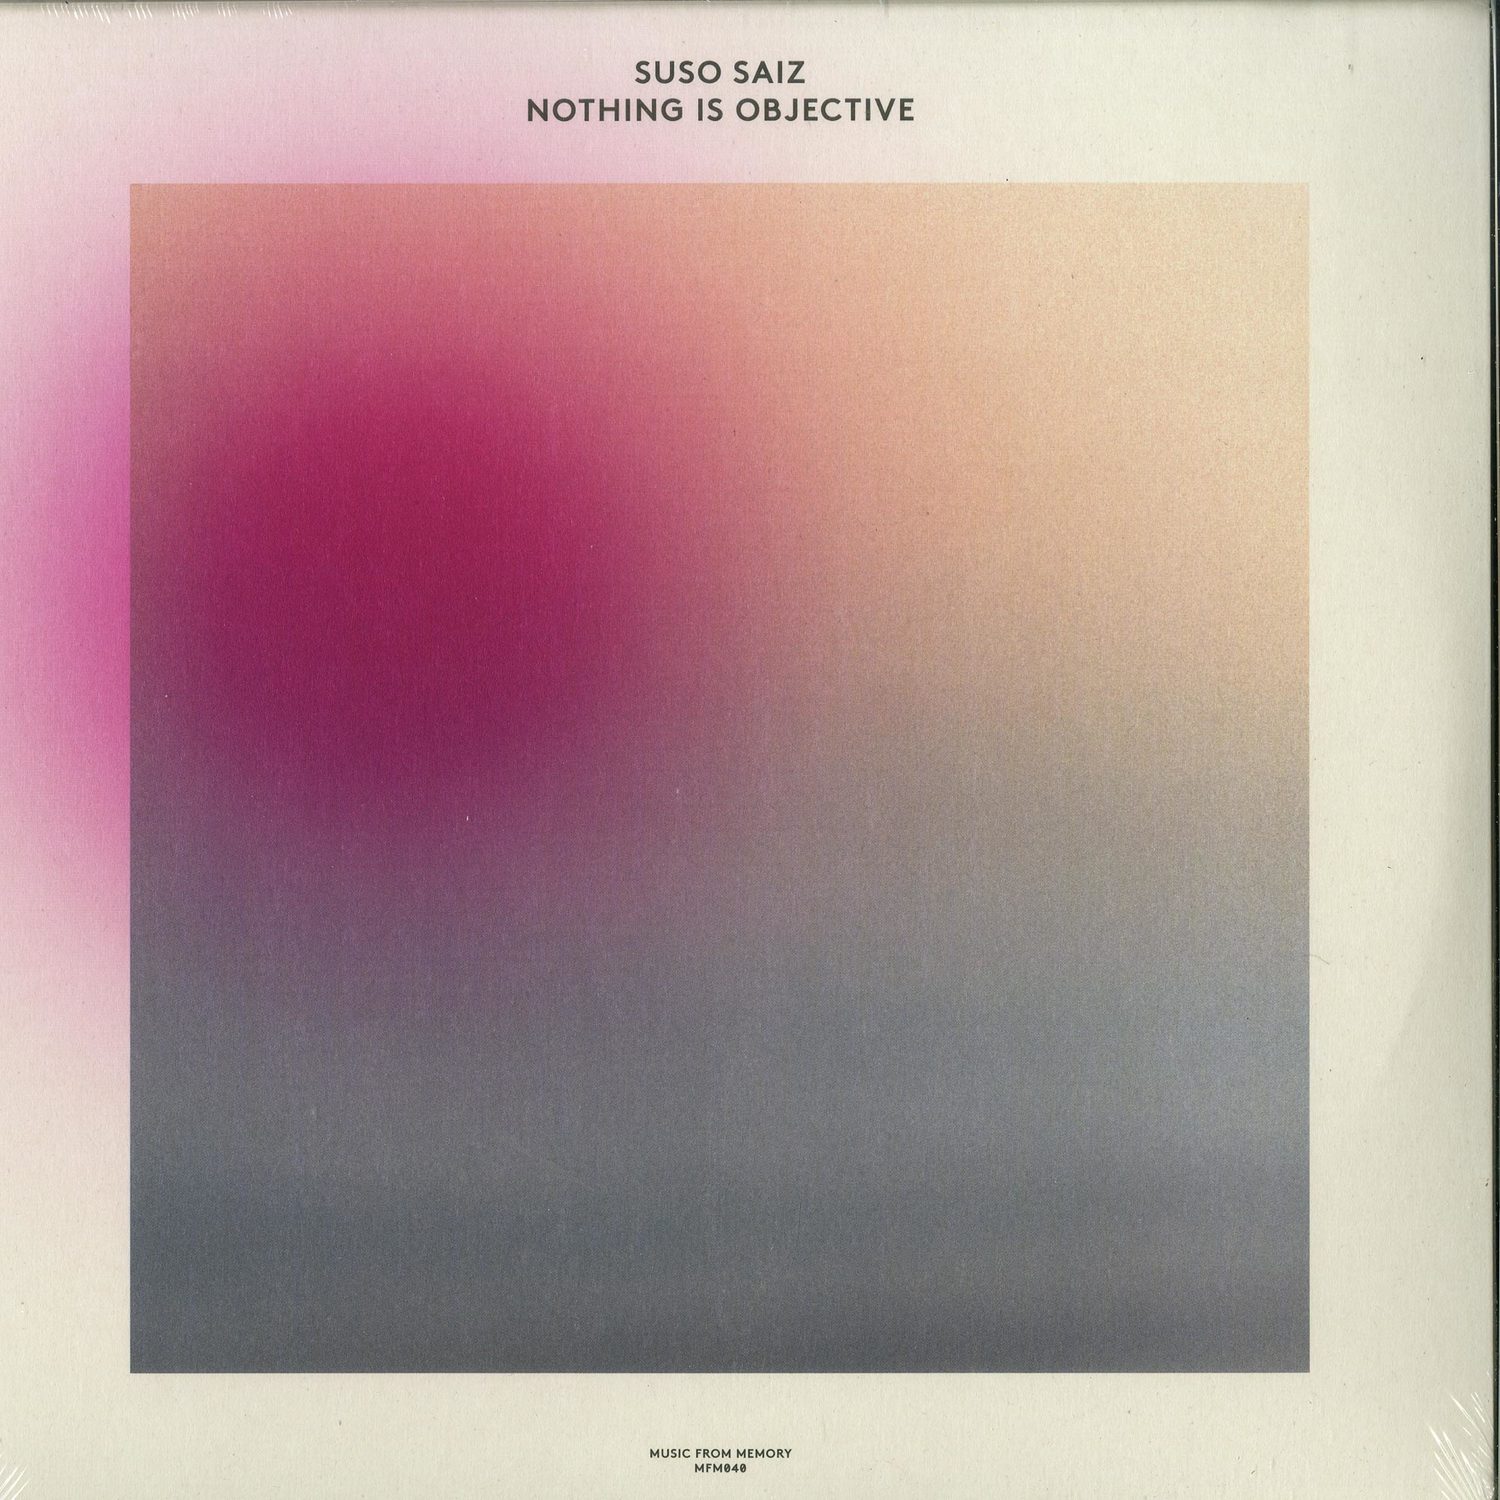 Suso Saiz - NOTHING IS OBJECTIVE 